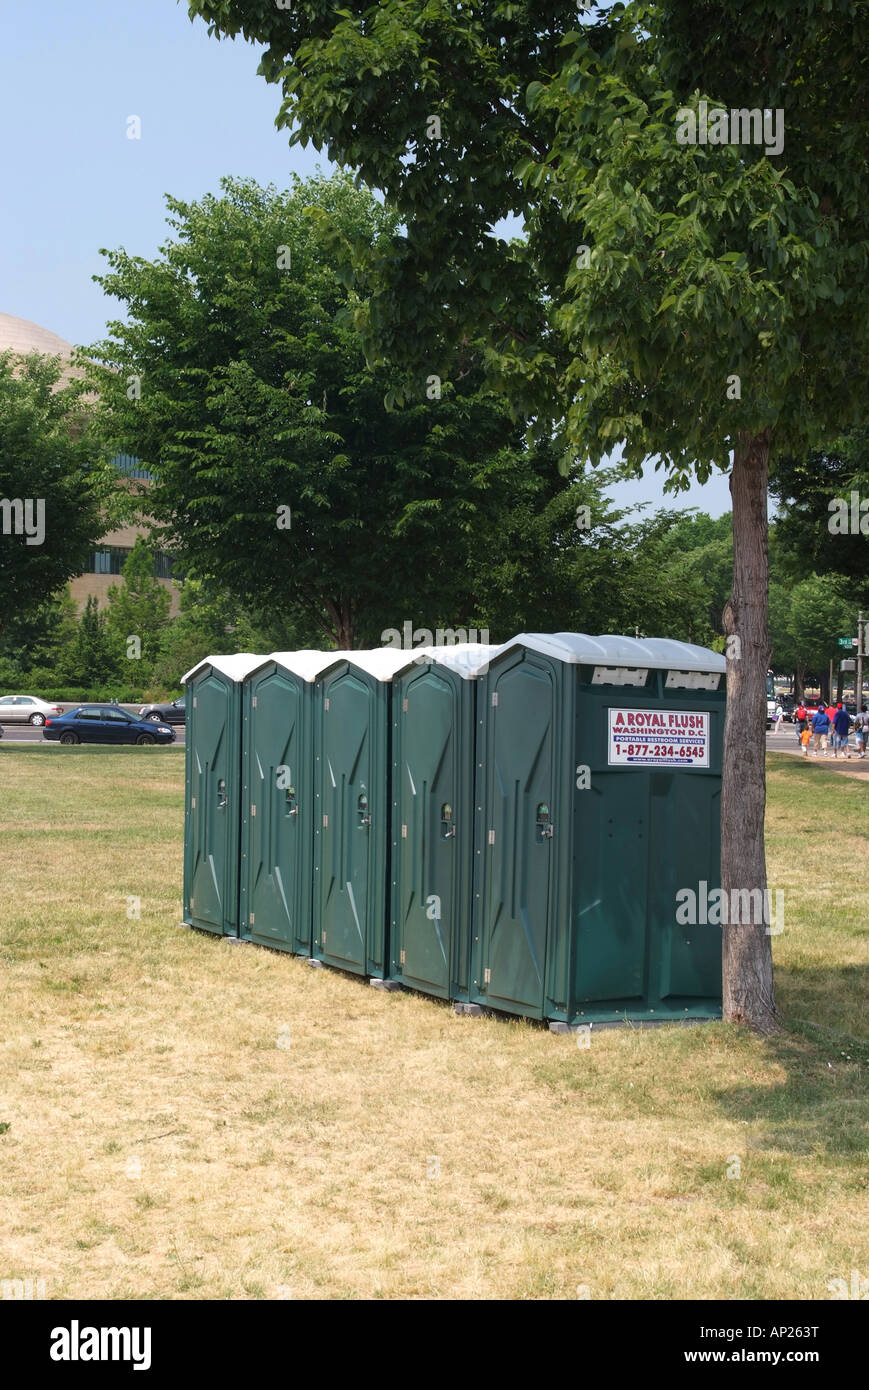 Five Public Lavatories in Line near Independence Avenue for Tourist Use in Washington DC United States America Stock Photo